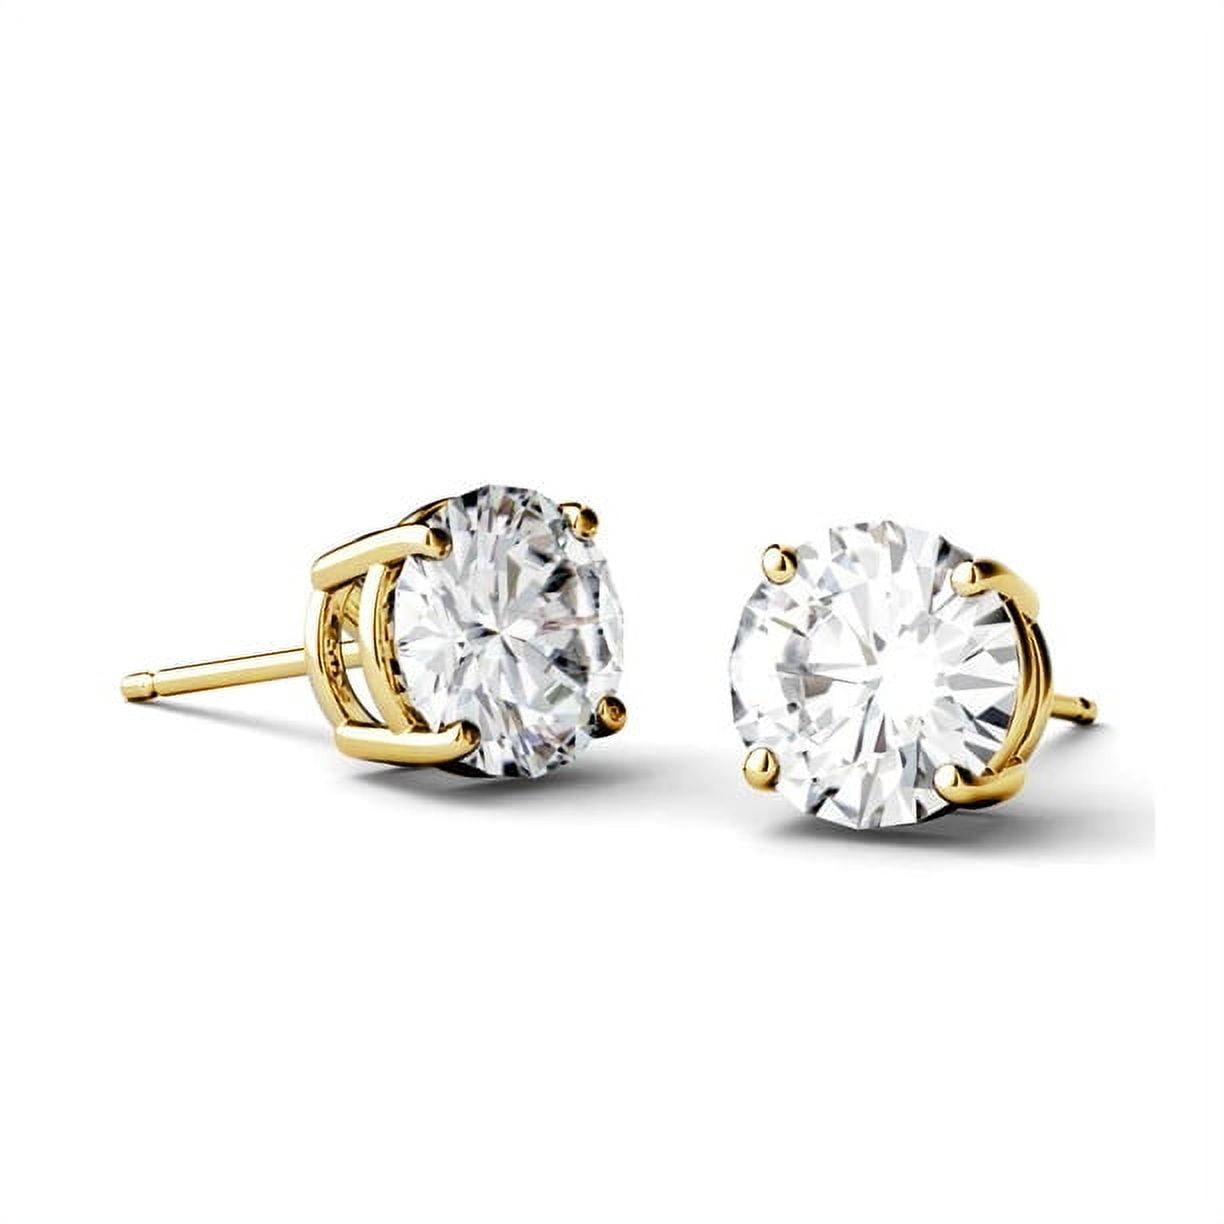 4 Prong 0.5 Carat Round Shaped Moissanite Solitaire Stud Earrings In 18K  White Gold Plating Over Silver 